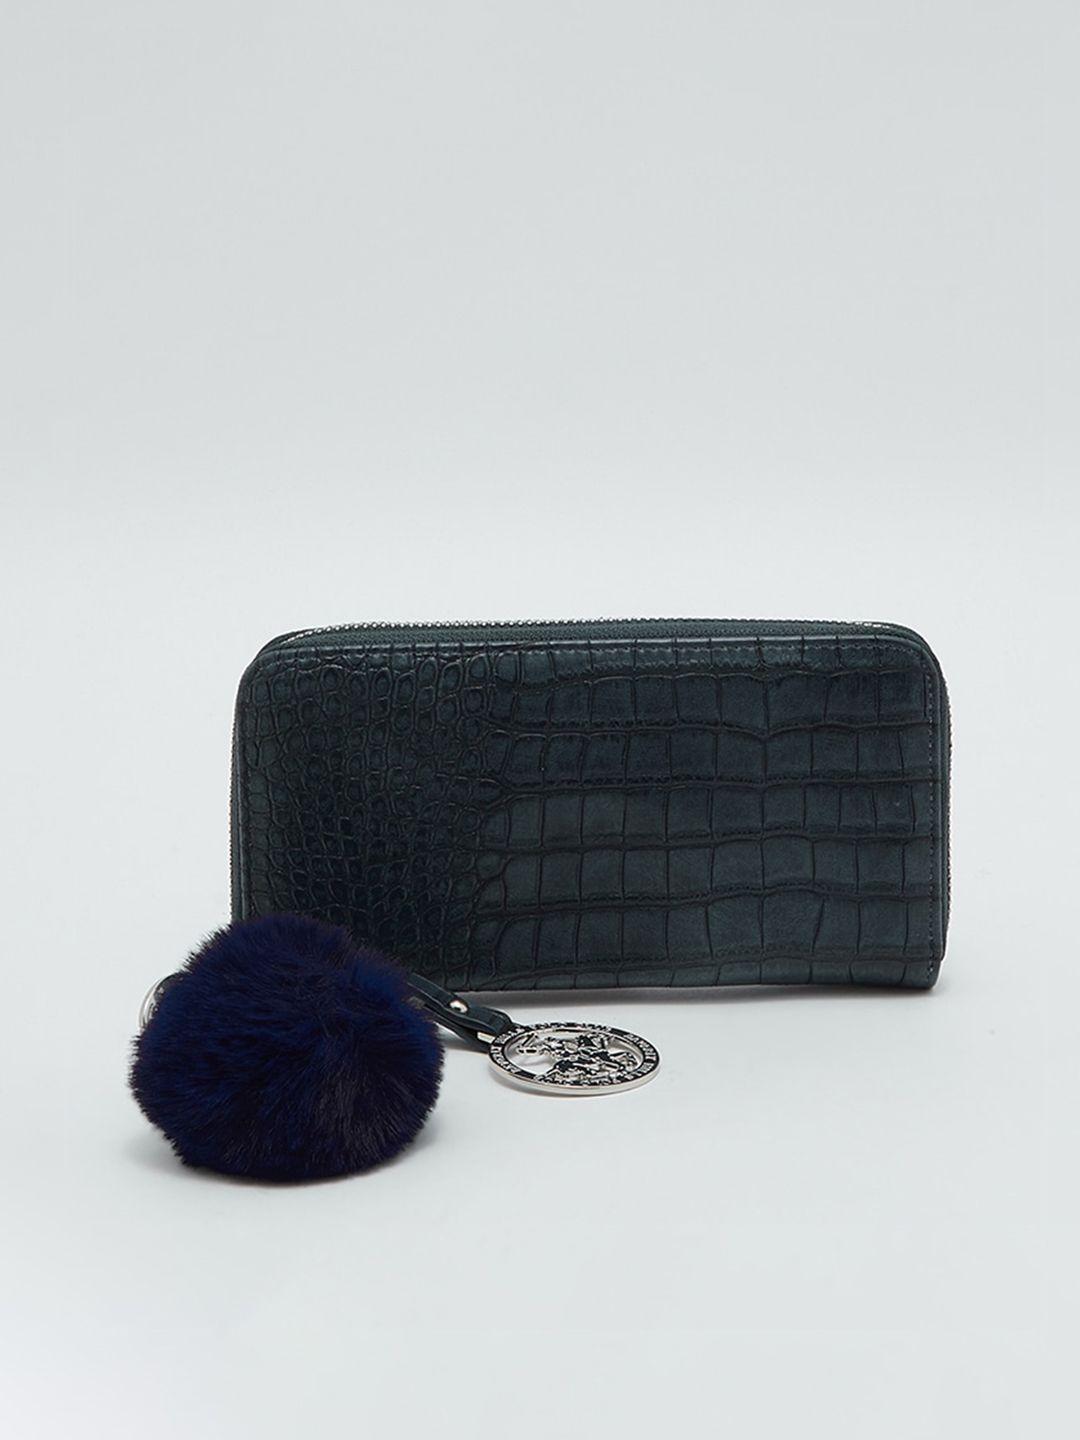 beverly hills polo club navy blue animal textured pu structured sling bag with tasselled